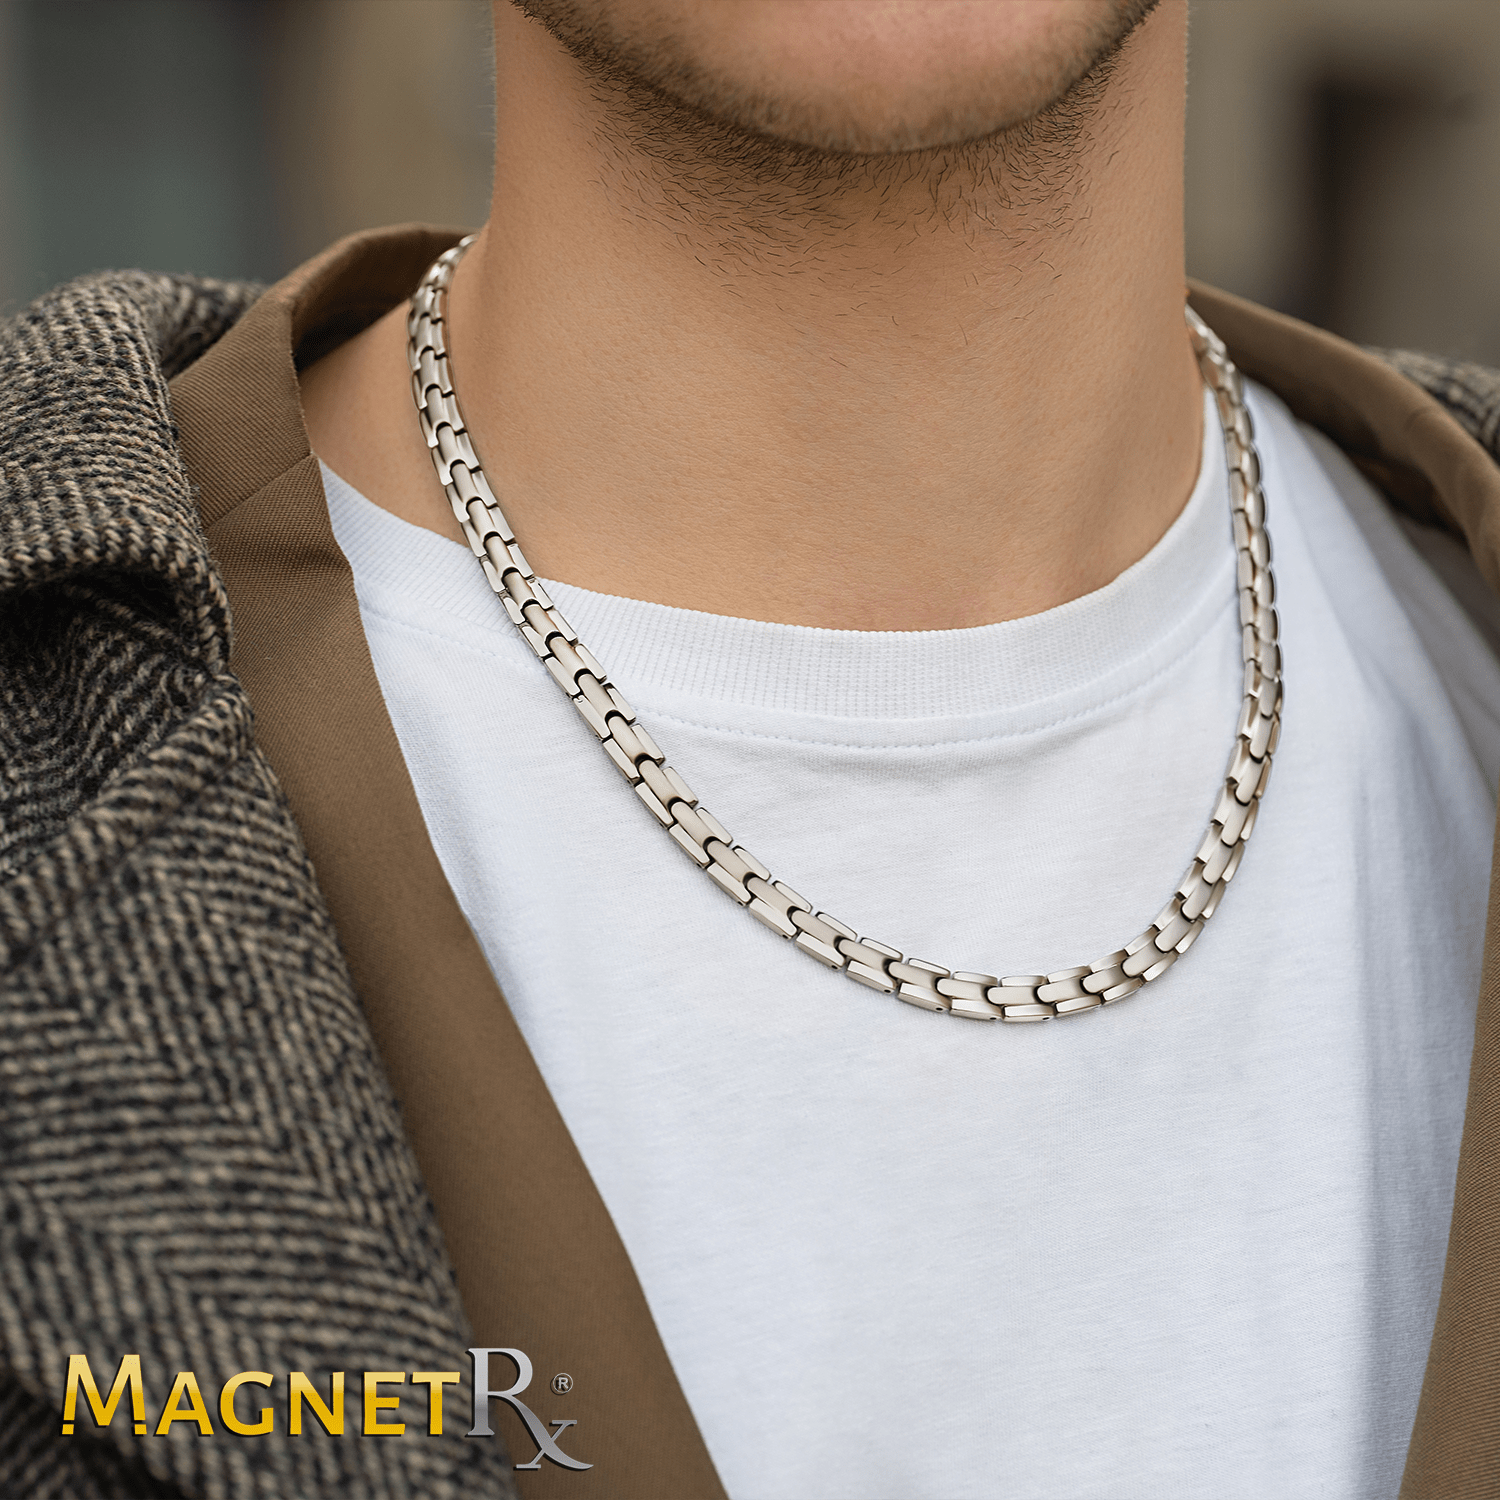 Experience The benefits of Magnetic Therapy with Our Titanium Magnetic Necklace Black Cross